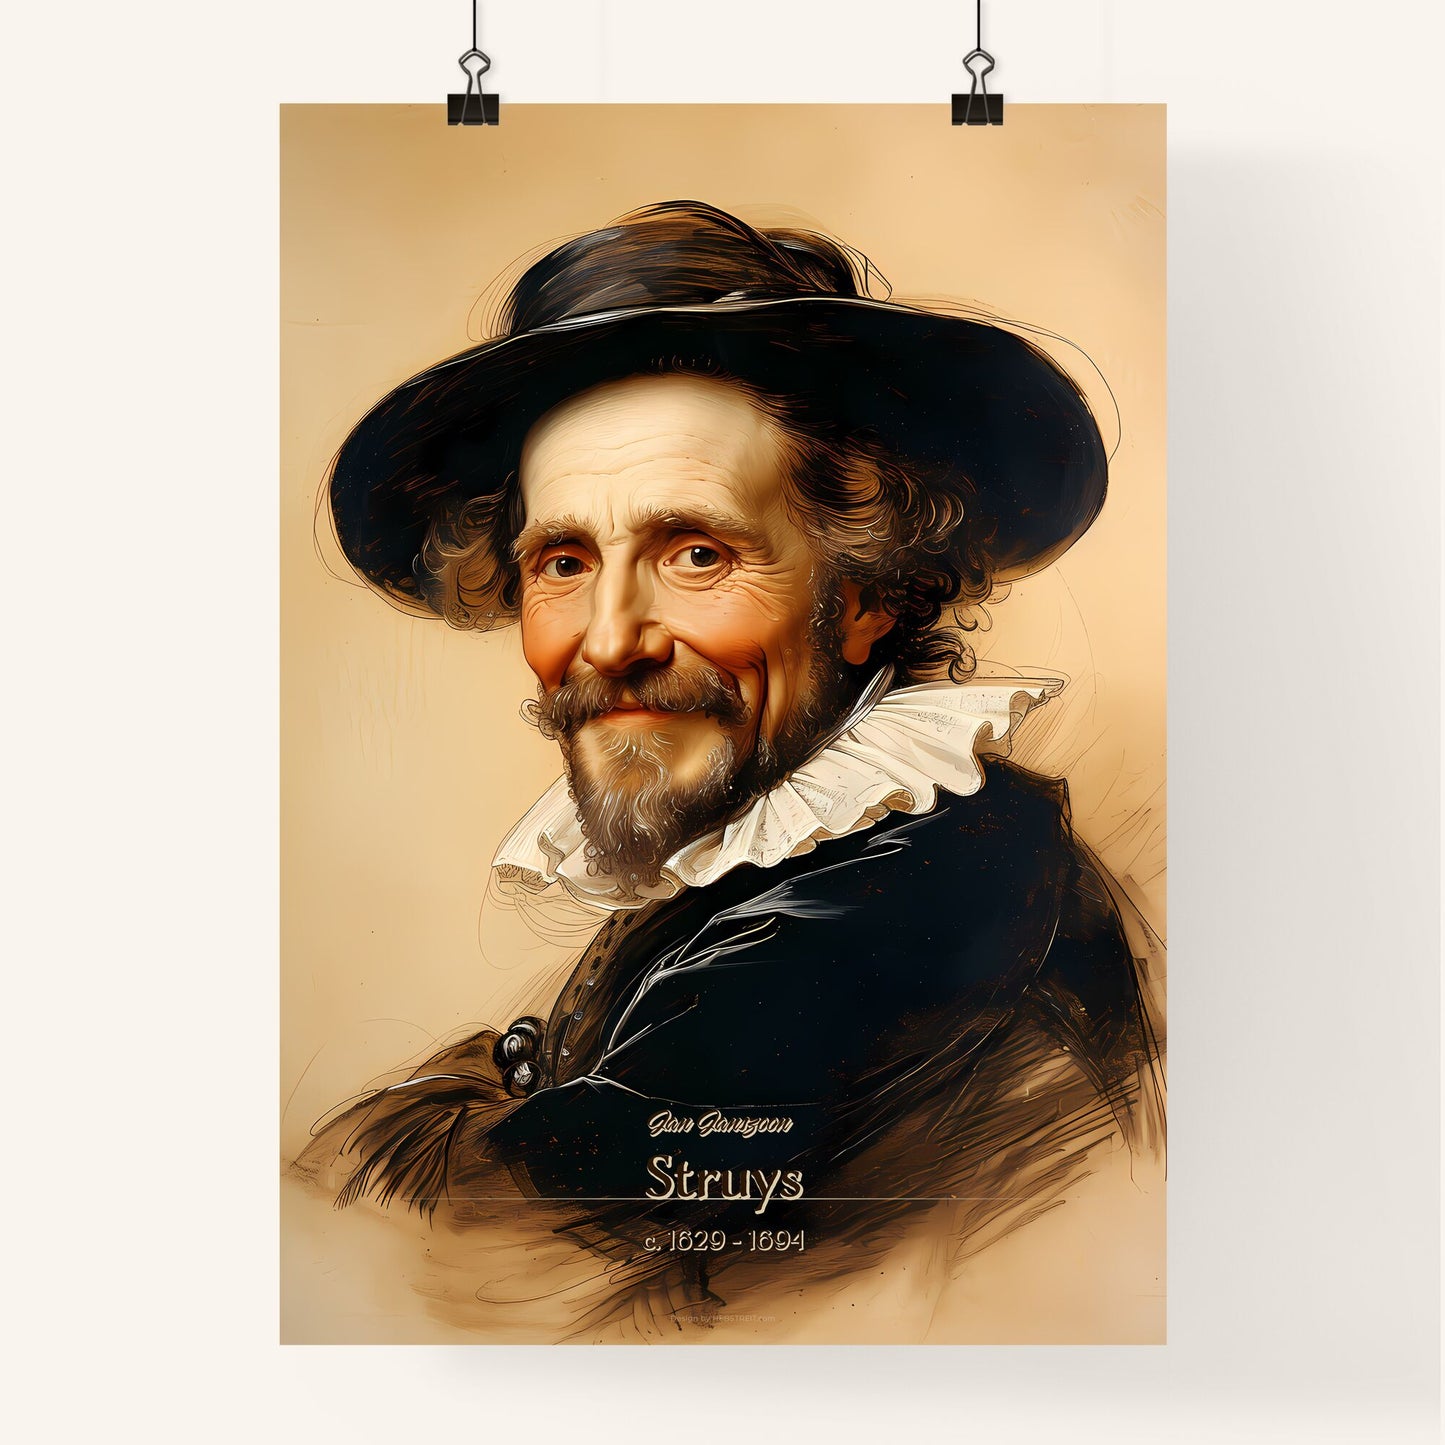 Jan Janszoon, Struys, c. 1629 - 1694, A Poster of a painting of a man wearing a hat Default Title